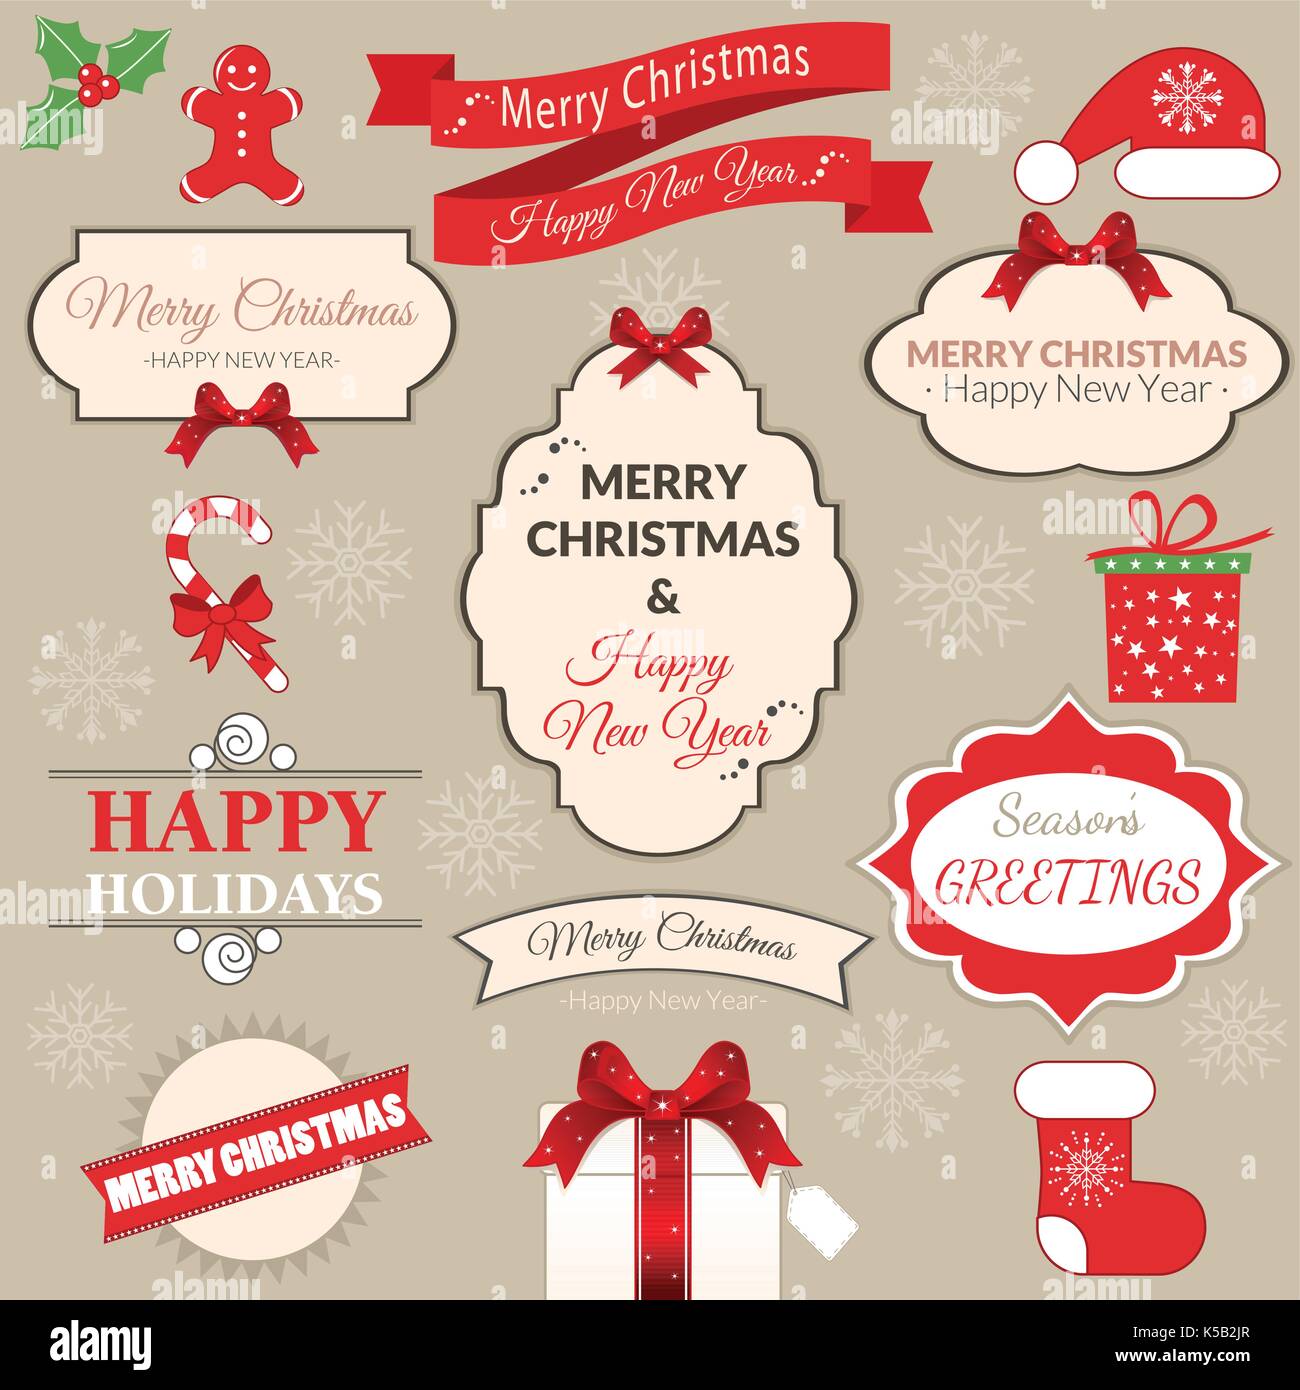 Christmas decoration vector design elements collection. Typographic elements, vintage labels, frames, ribbons, set. Flourishes calligraphic. Stock Vector